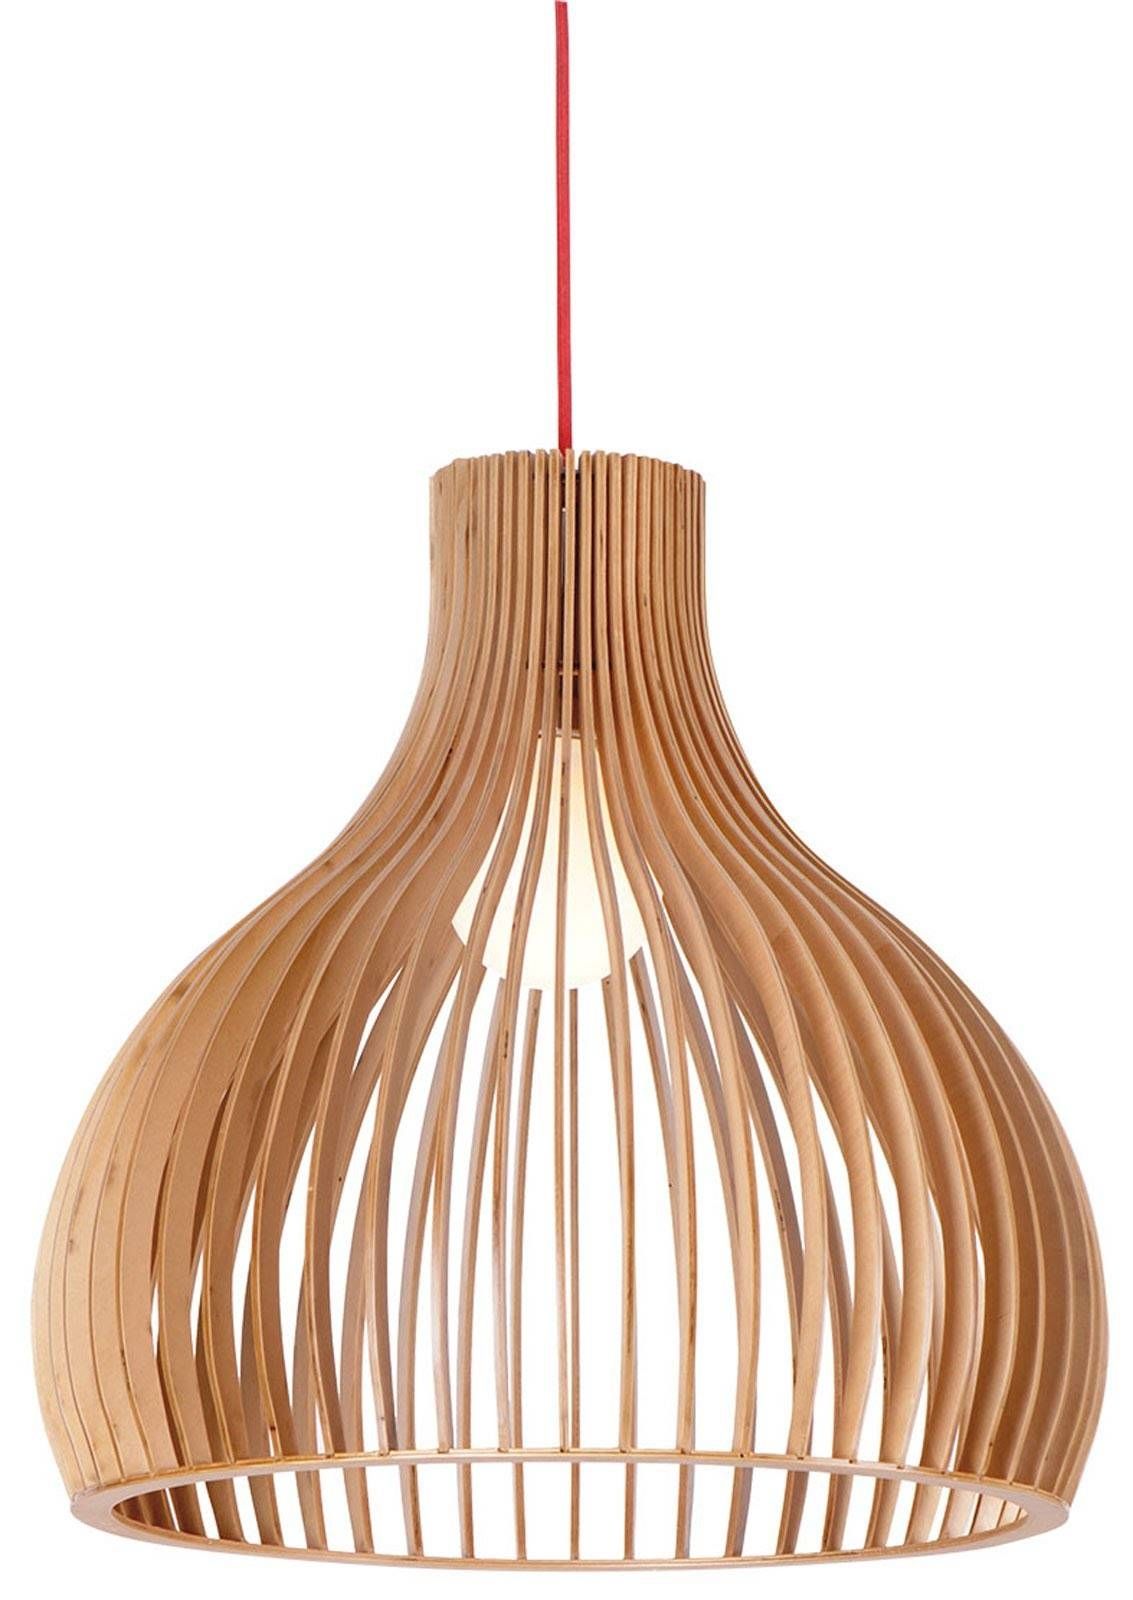 Buy Wood Pendant Light In Melbourne [malmo] – Youtube With Regard To Wooden Pendant Lights (Photo 12 of 15)